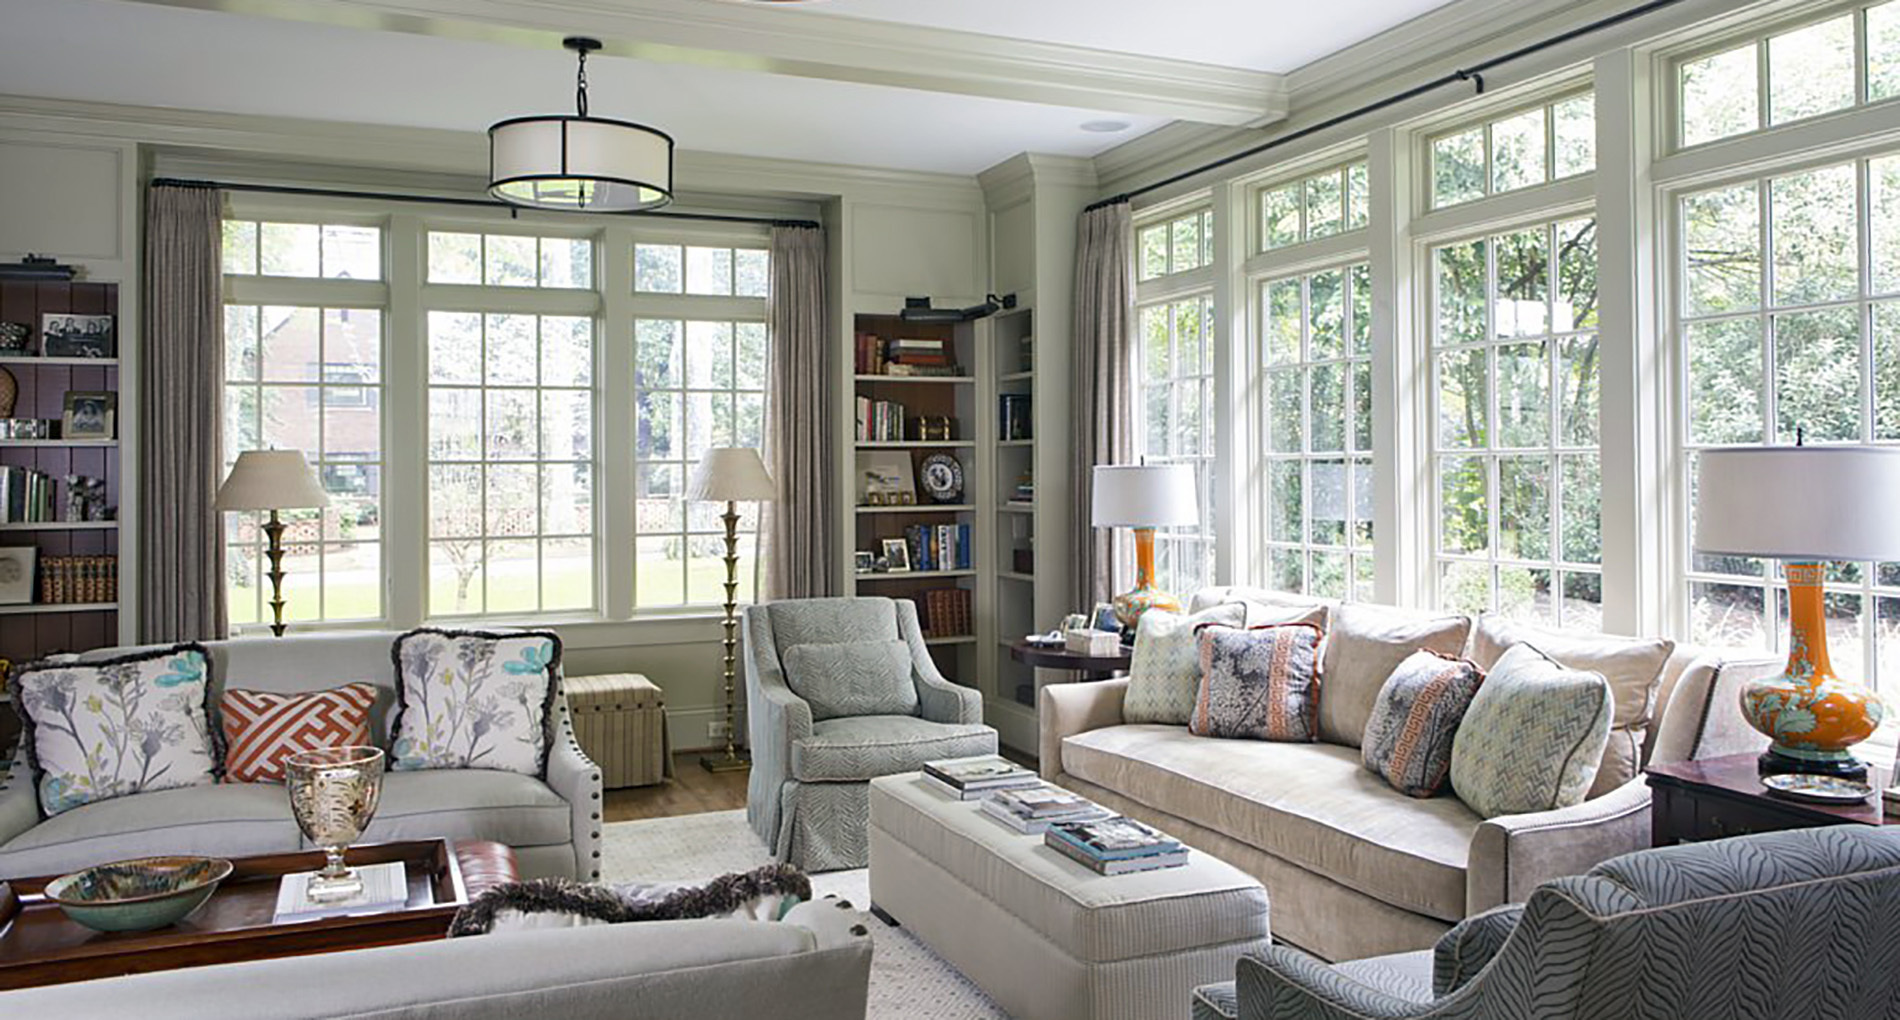 custom neutral colored living room with built in shelving and large windows